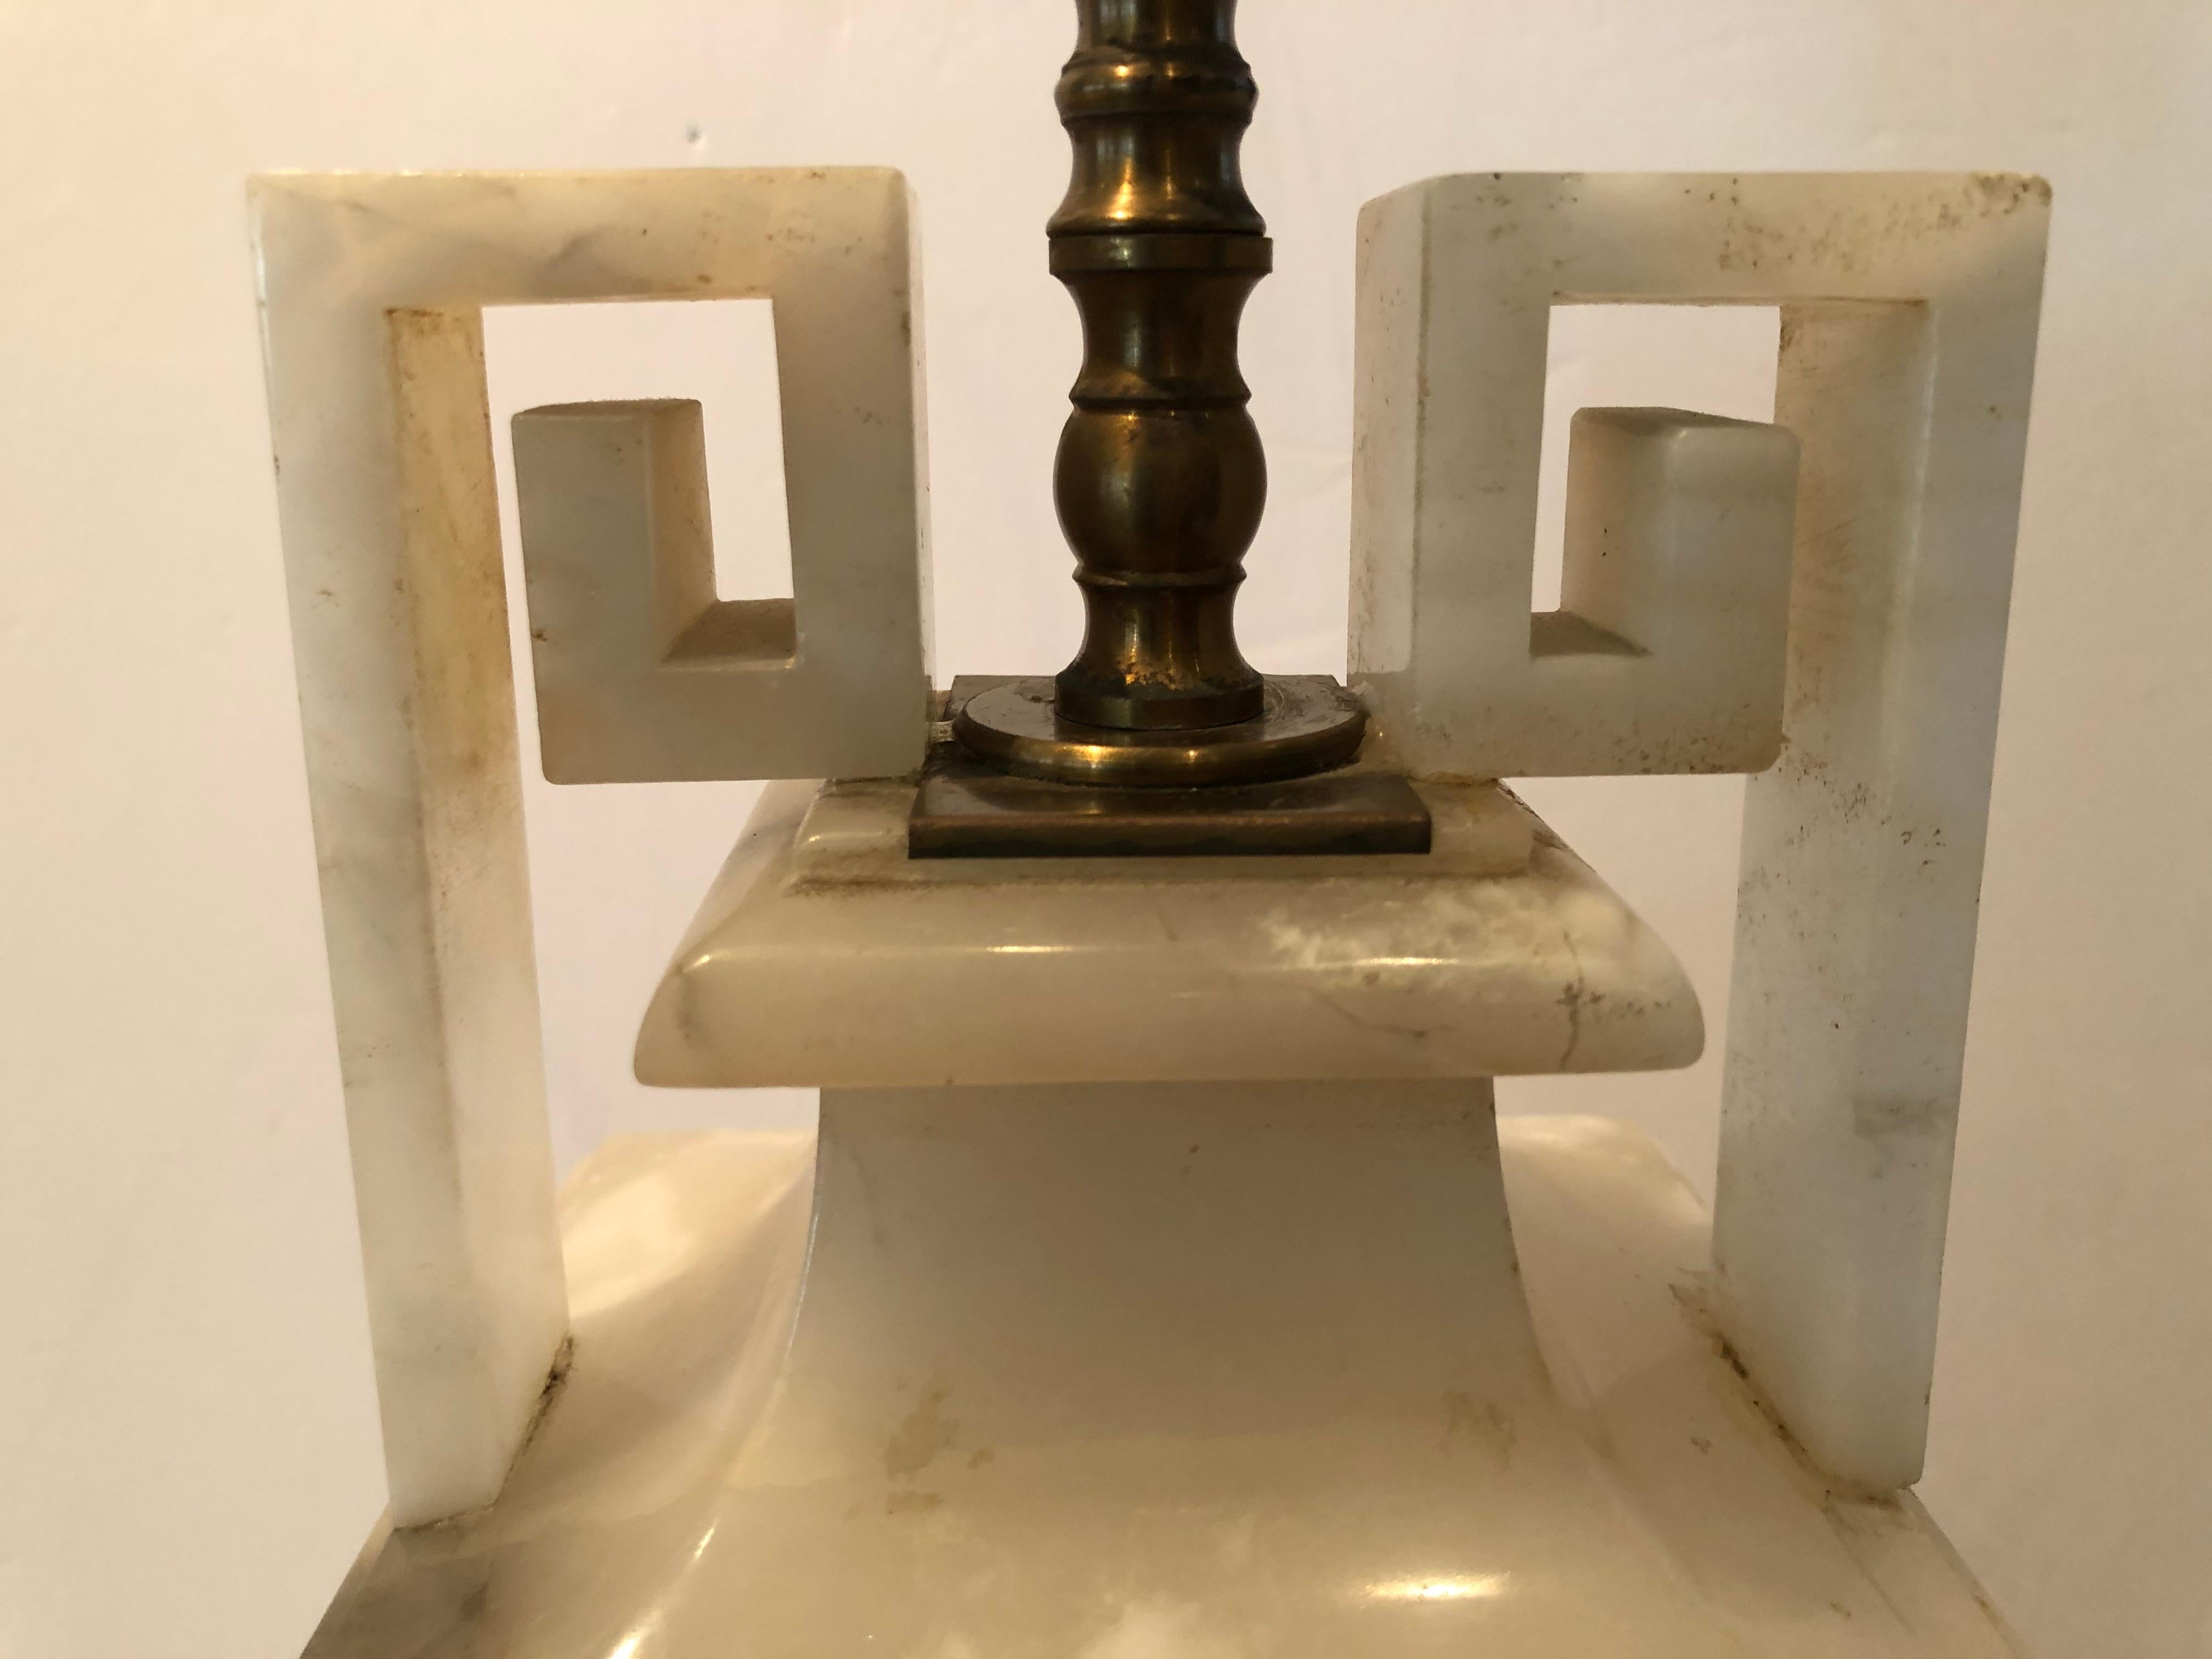 Neoclassical style vintage lamp made of alabaster having beautiful urn form accentuated with Greek key handles. The alabaster is a creamy white with black grey veining.